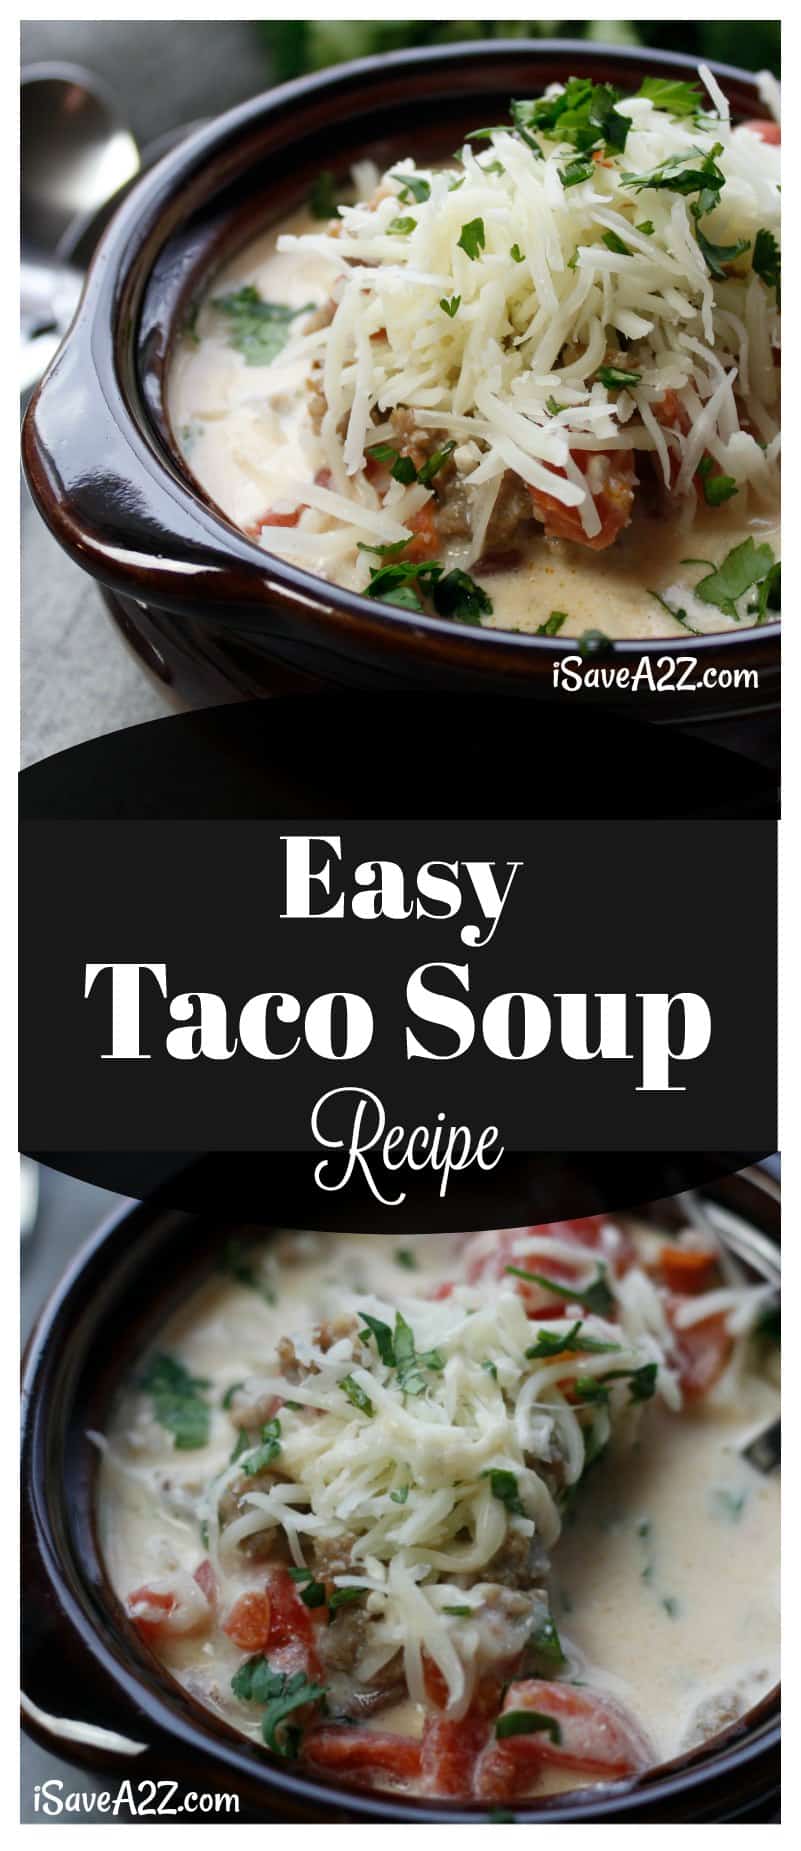 Easy Taco Soup Recipe made in the Crockpot